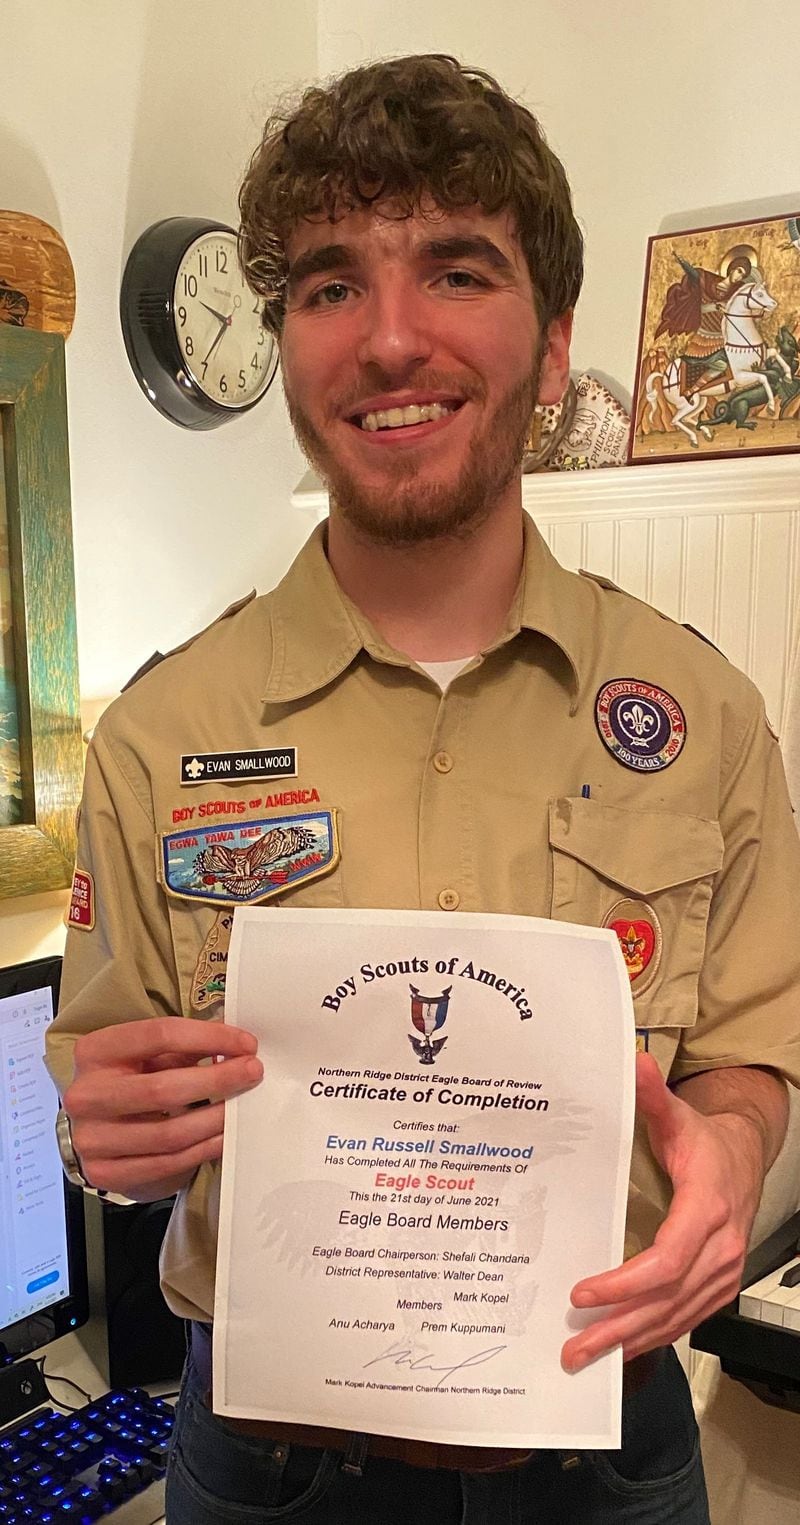 The Northern Ridge Boy Scout District (Cities of Roswell, Alpharetta, John’s Creek, Milton) announced Evan Smallwood, of Troop 841, passed his Board of Review on June 21 to become an Eagle Scout. Sponsored by St Thomas Aquinas Catholic Church, his project was the design and construction of a stone pathway with stairs to the Outhouse building associated with the old log cabin that belongs to the City of Alpharetta.  Evan also planted around the out hose to help improve its aesthetics.